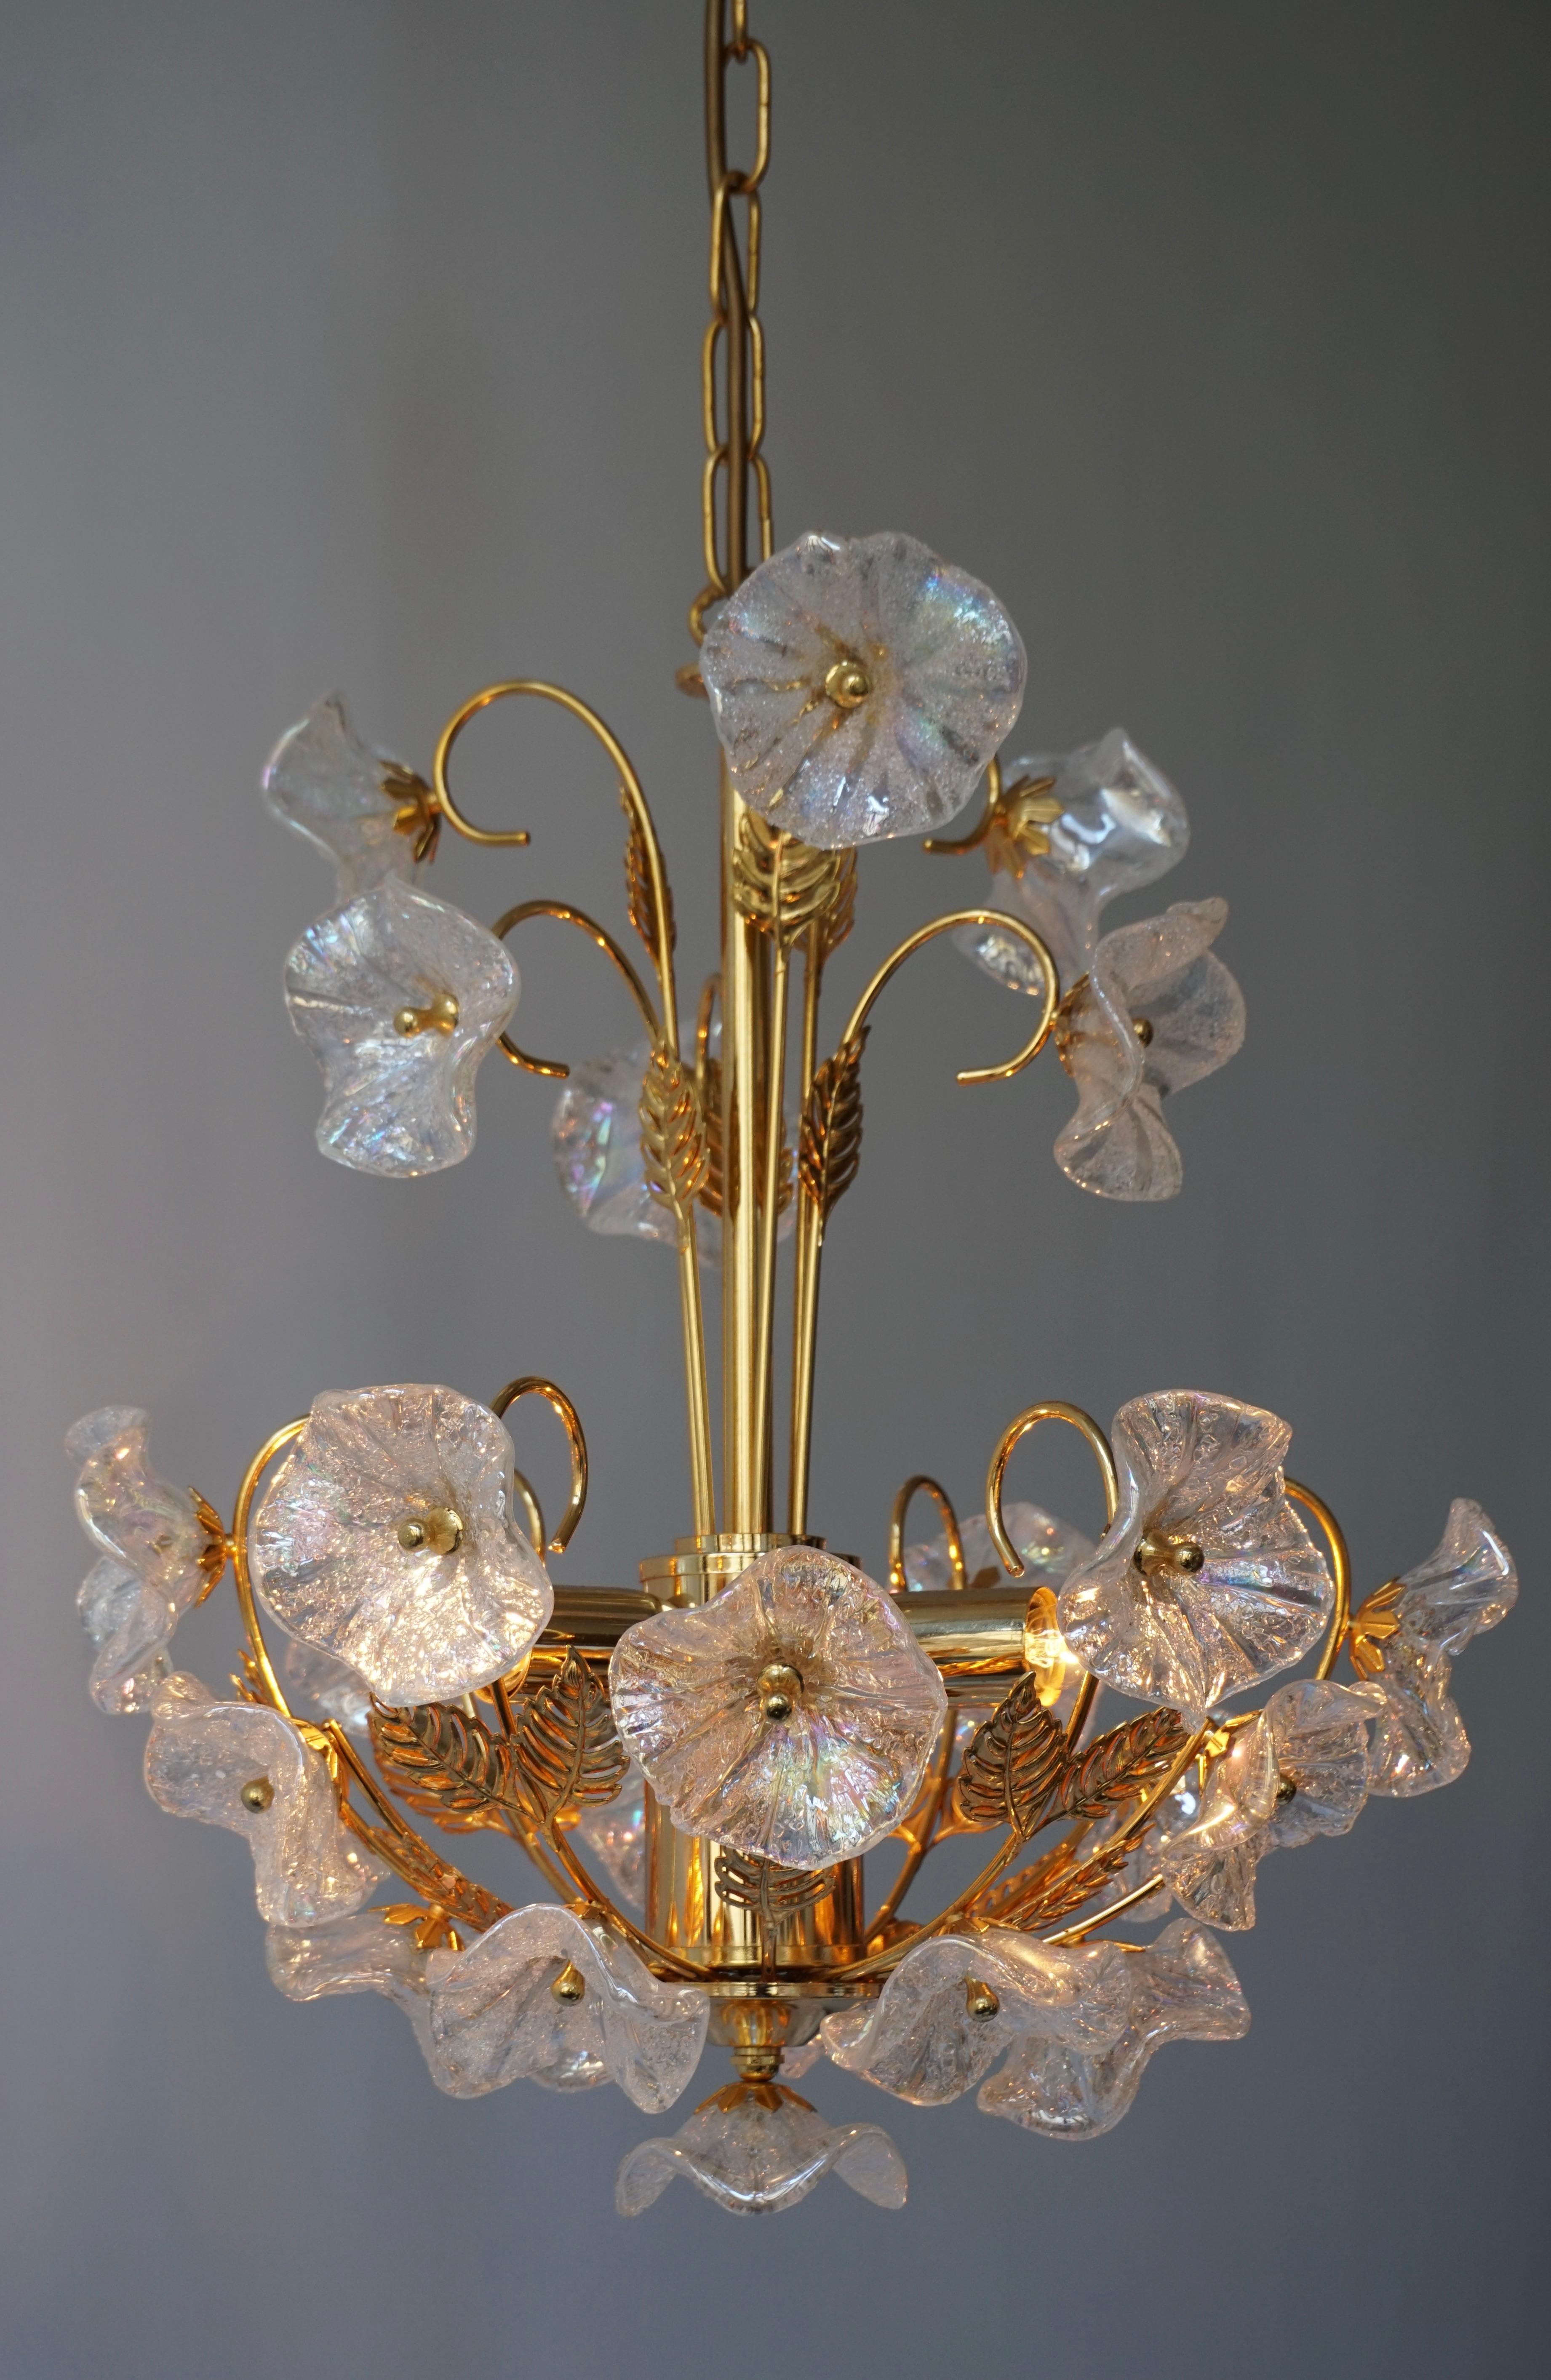 Iridescent Murano glass and brass floral chandelier.
Measures: Diameter 40 cm.
Height fixture 47 cm.
Total height including the chain and canopy 85 cm.
Three E14 bulbs.